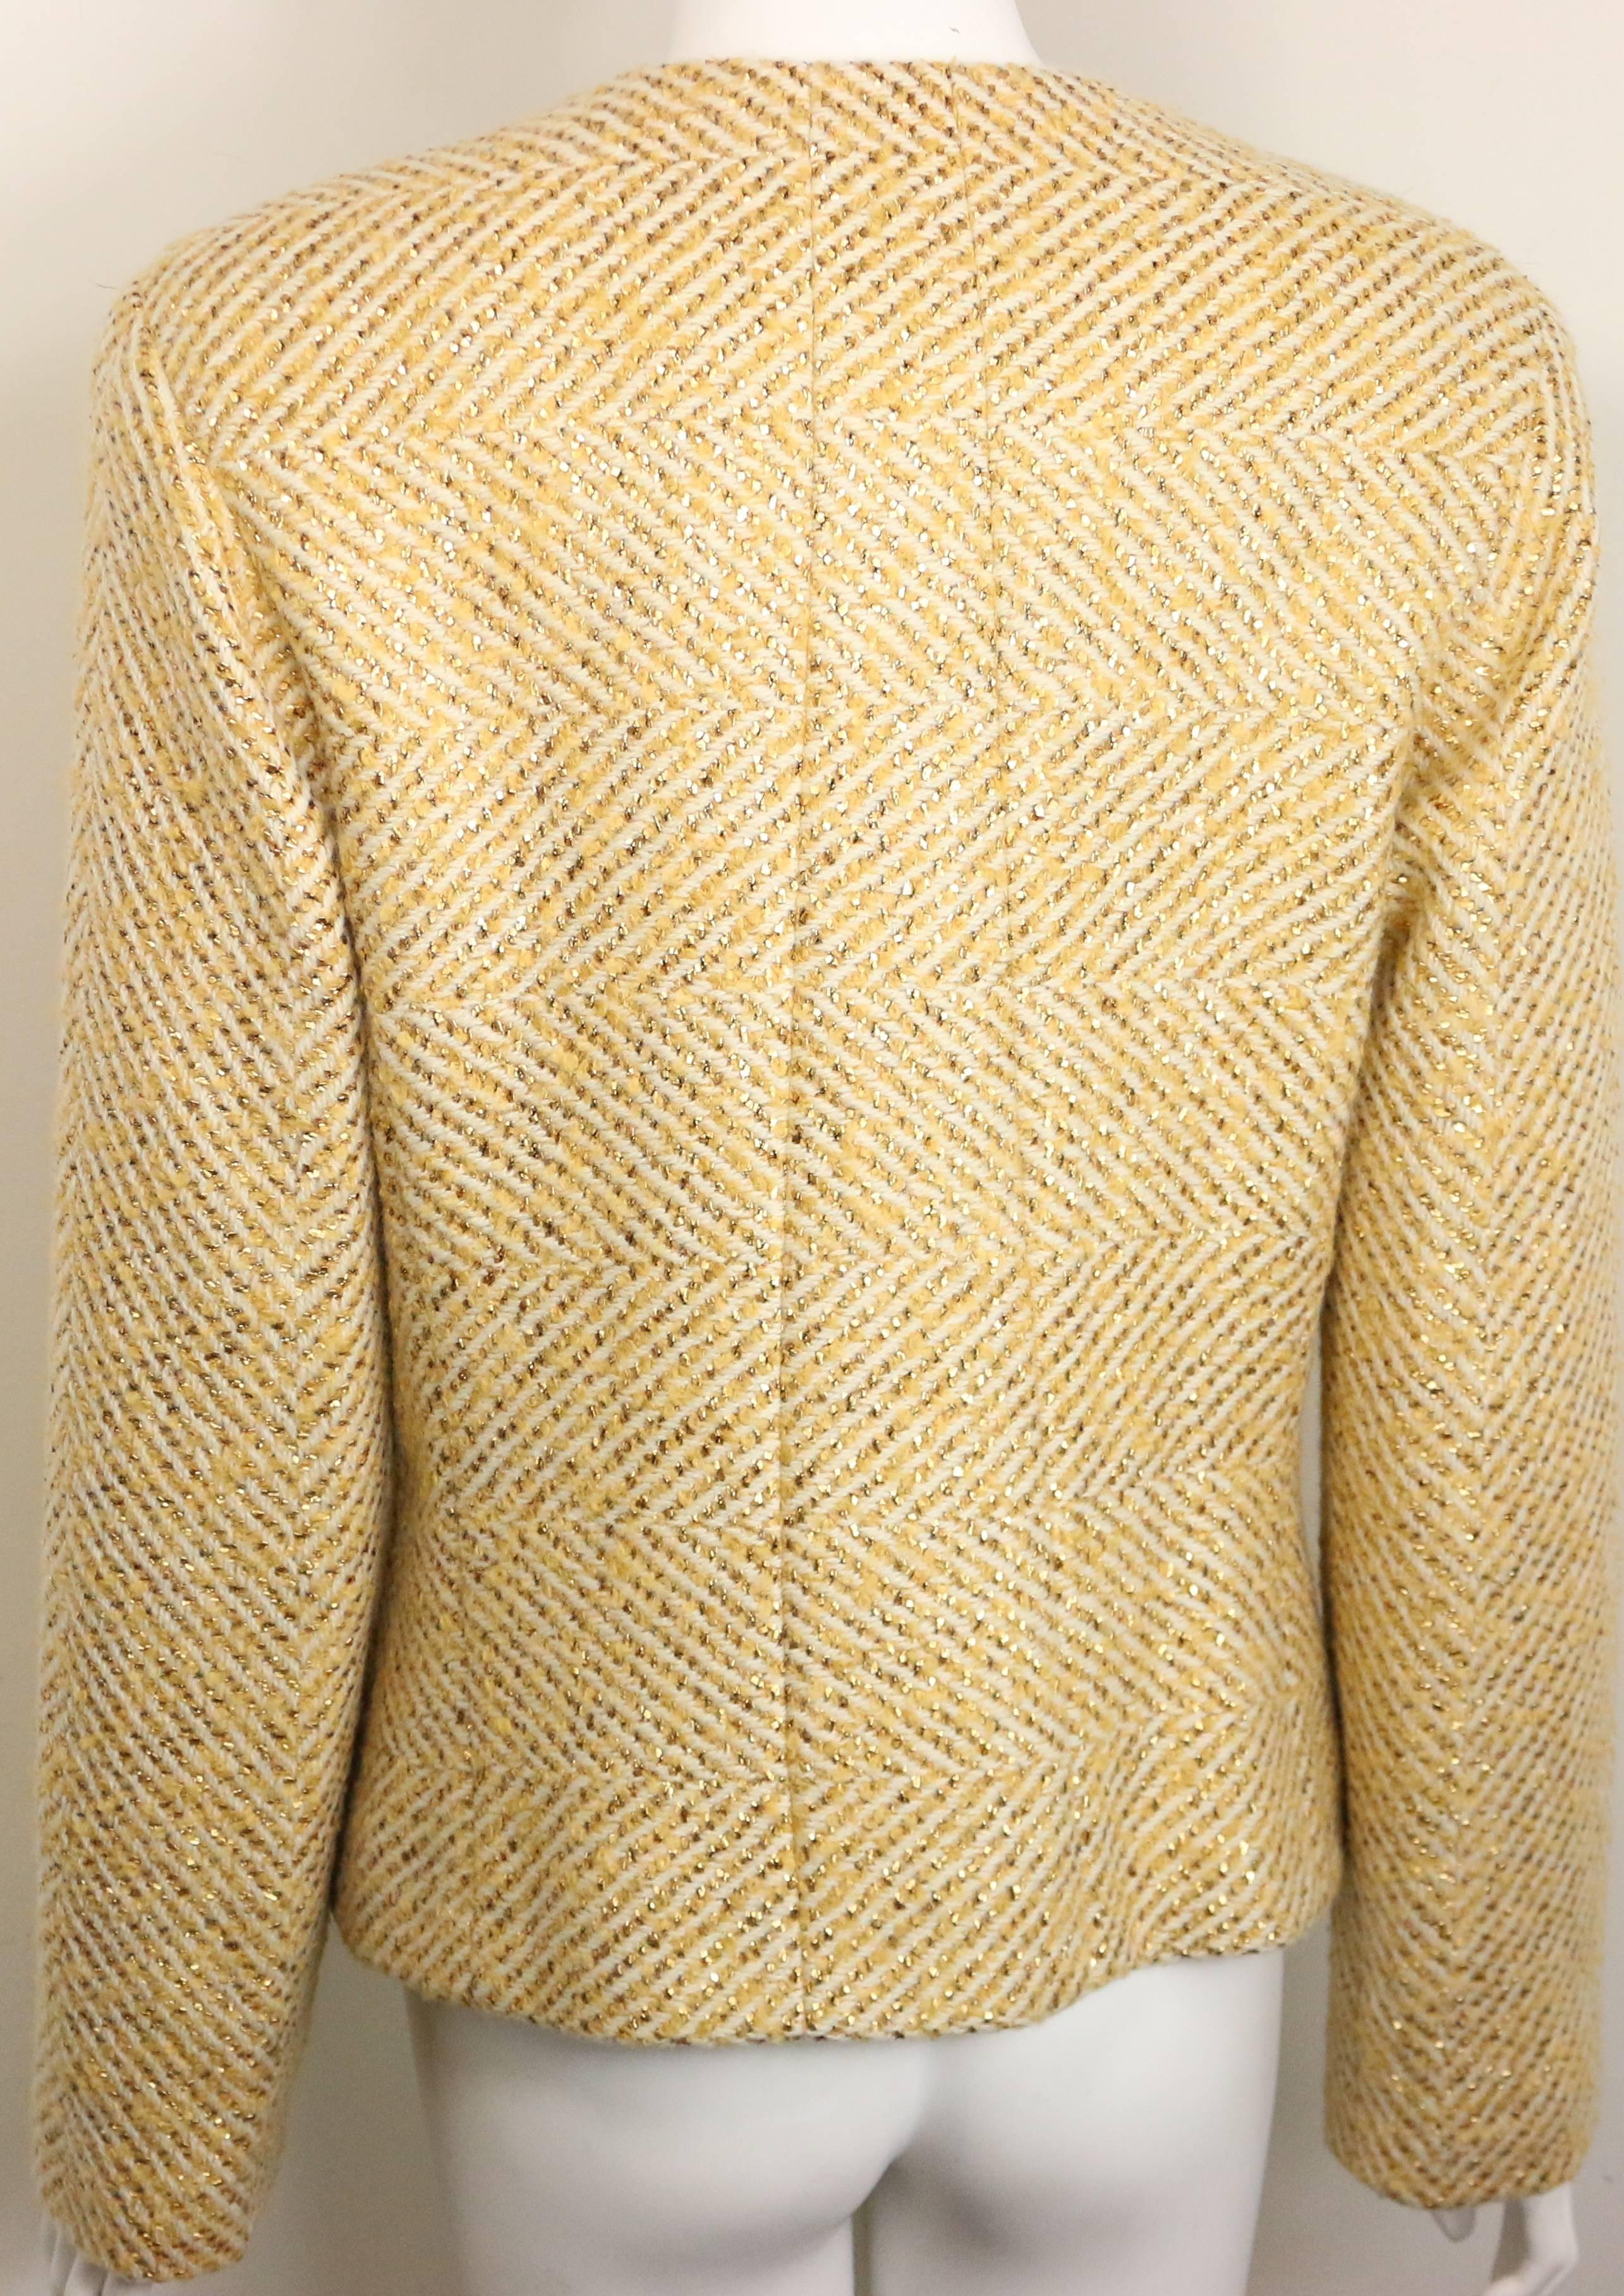 - Chanel gold-tone metallic glitter cream wool tweed shawl jacket from fall 2000 collection. 

- Featuring four flattened gold-tone metal 